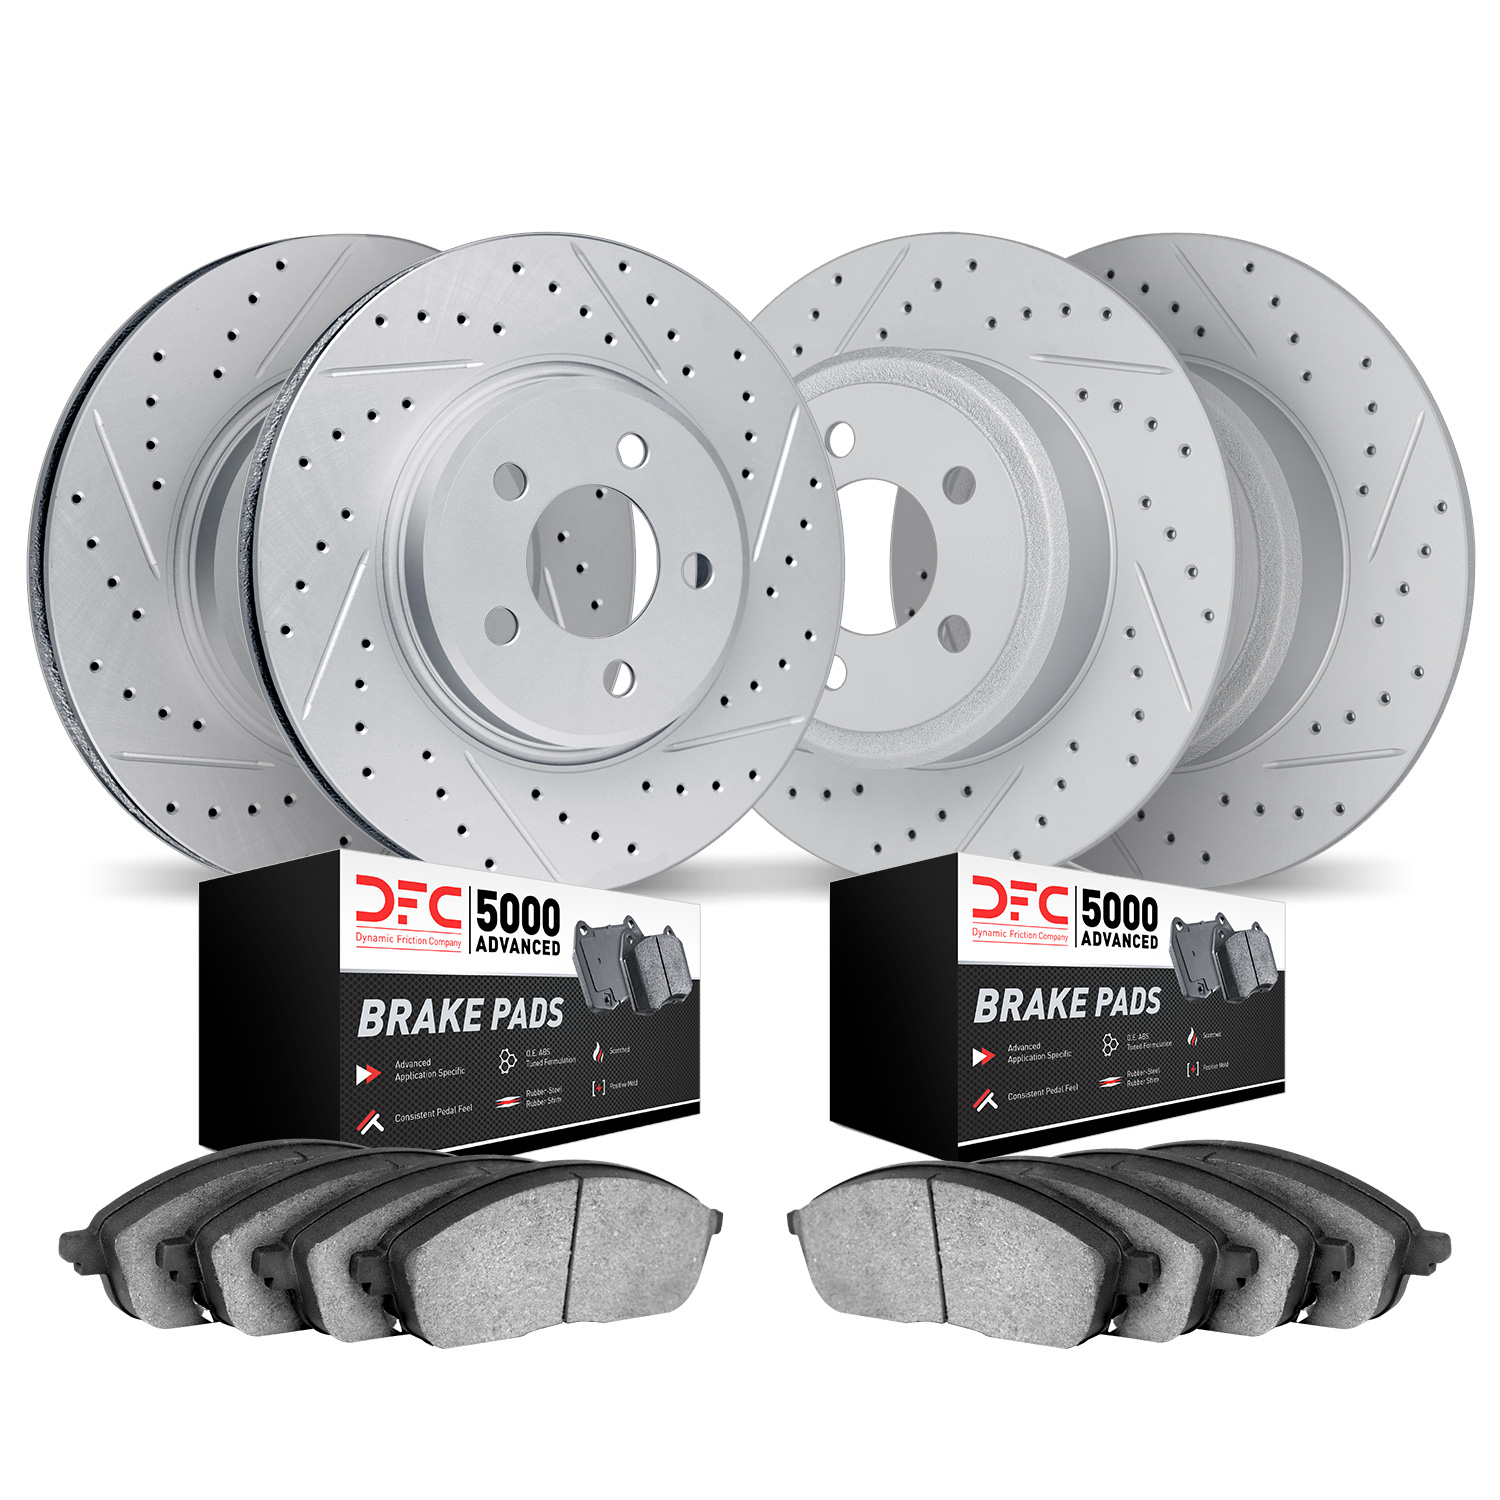 2504-42064 Geoperformance Drilled/Slotted Rotors w/5000 Advanced Brake Pads Kit, 2014-2020 Mopar, Position: Front and Rear